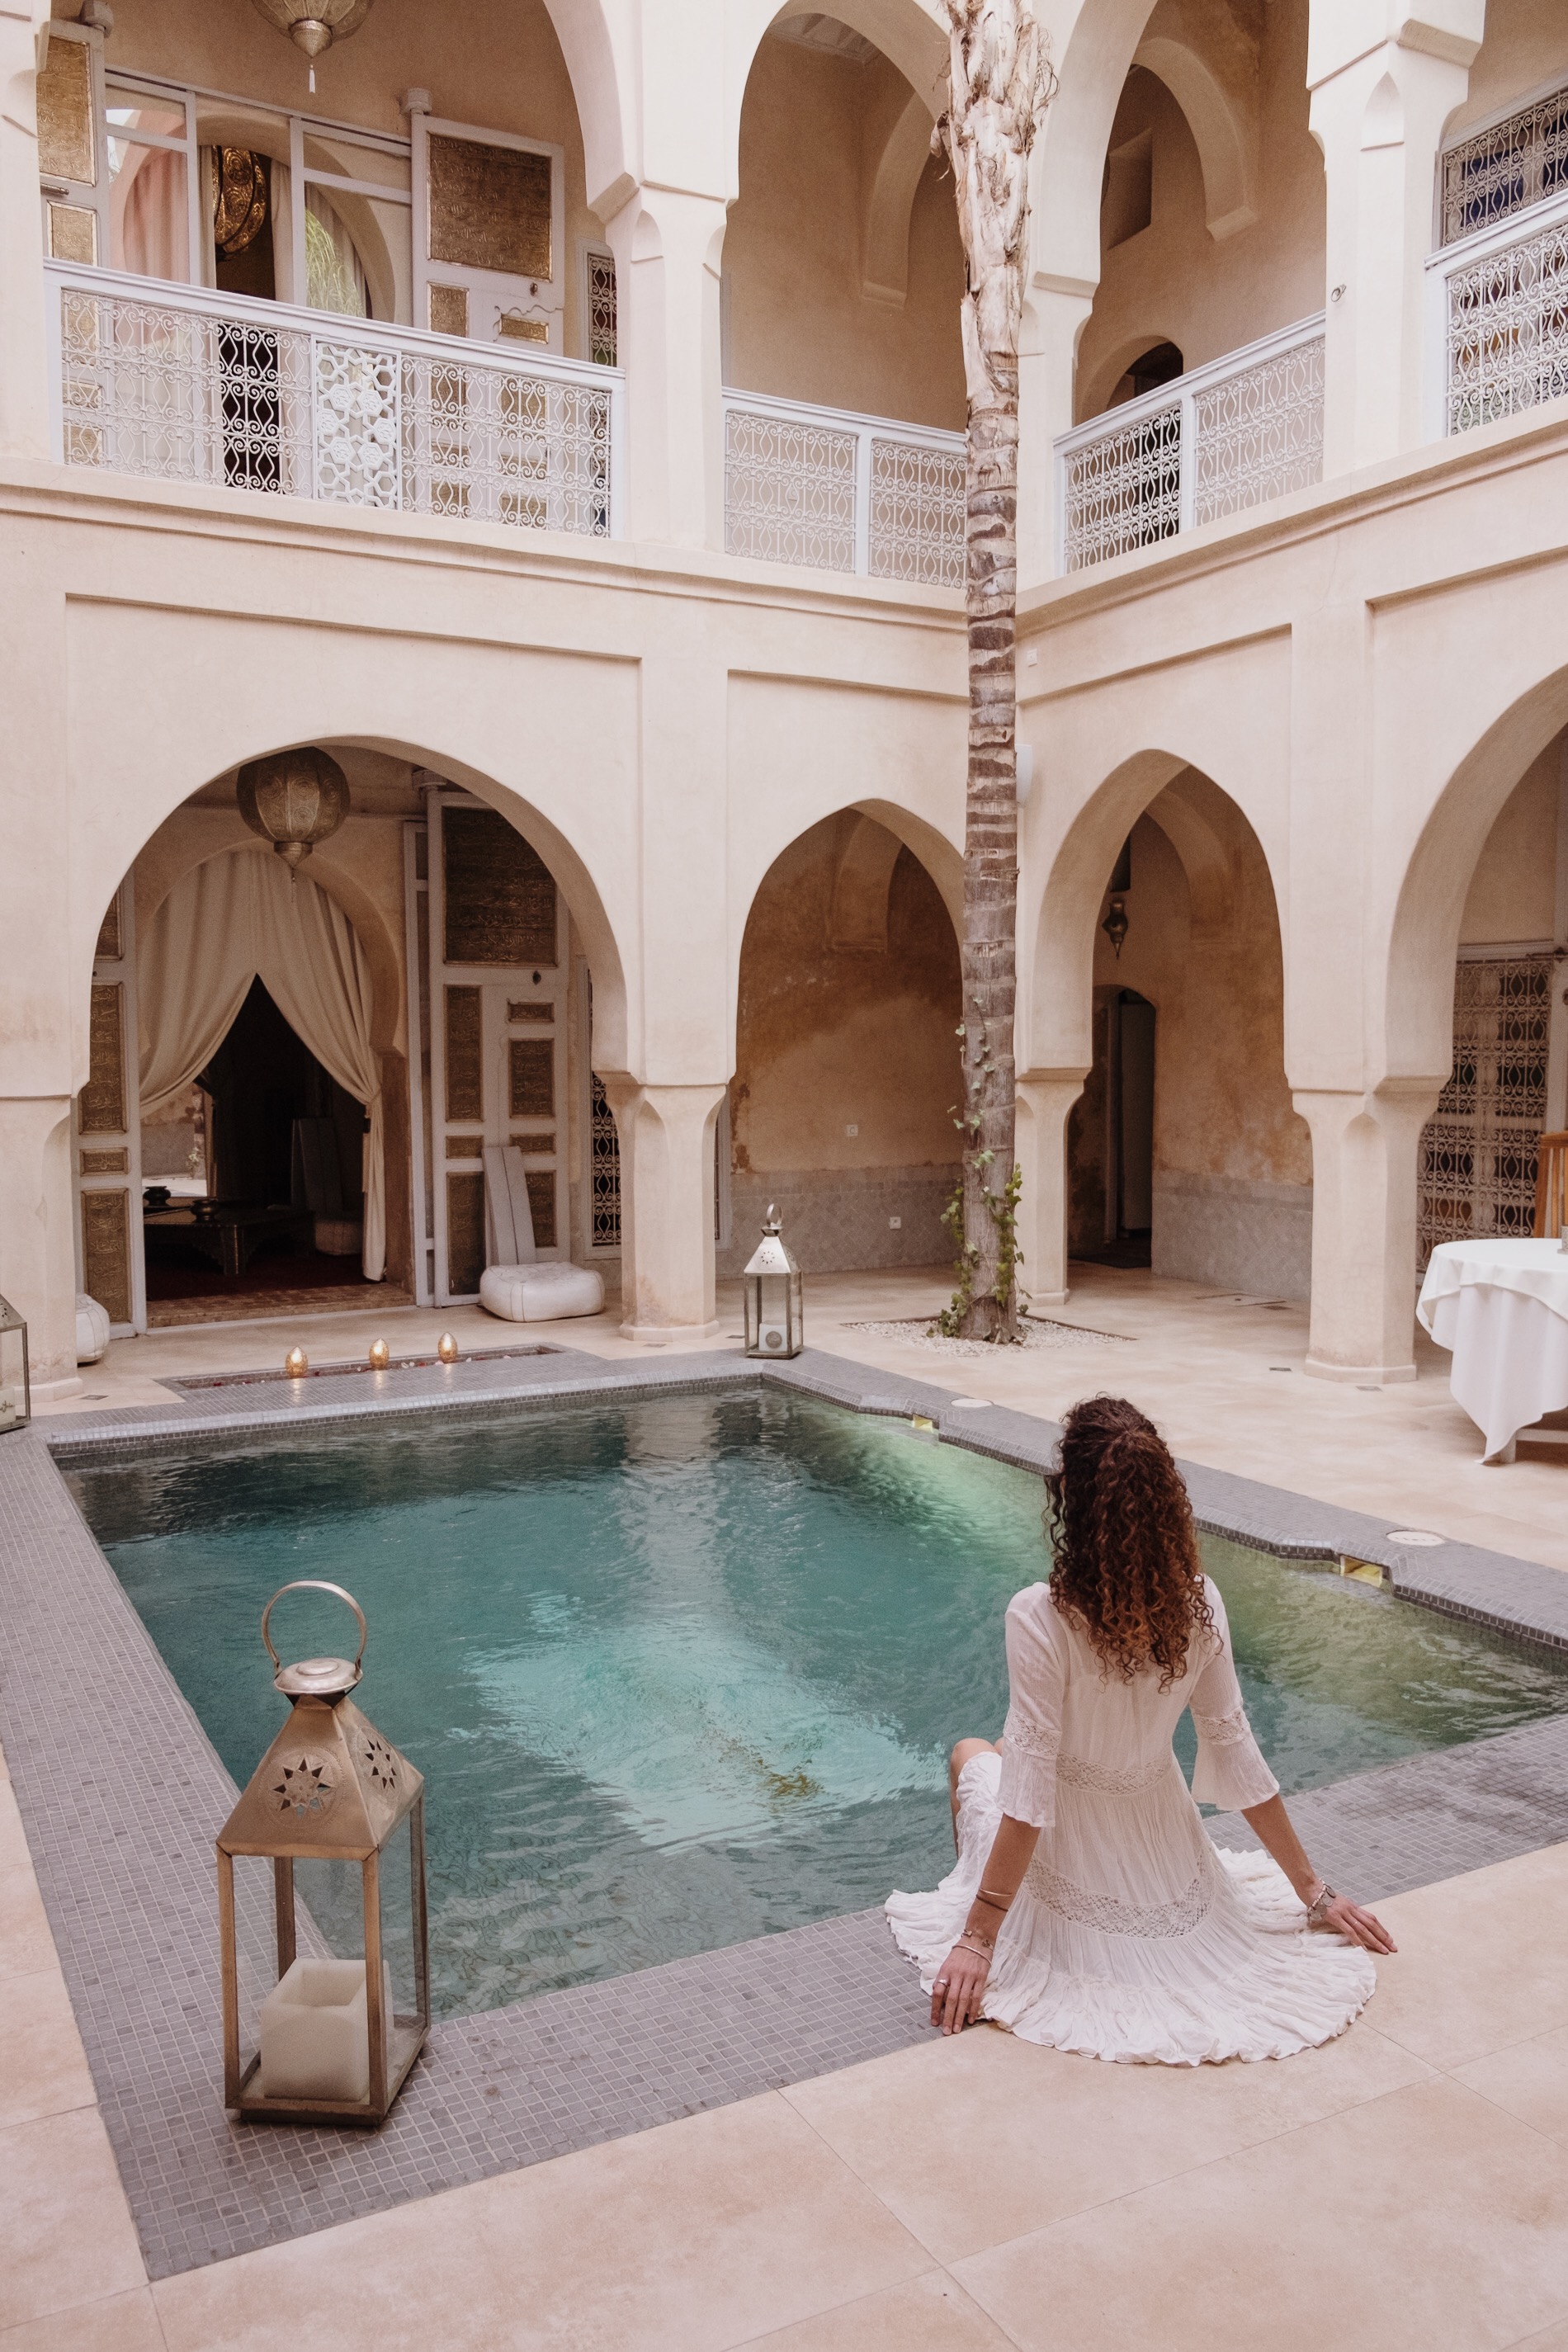 Accommodations in Morocco